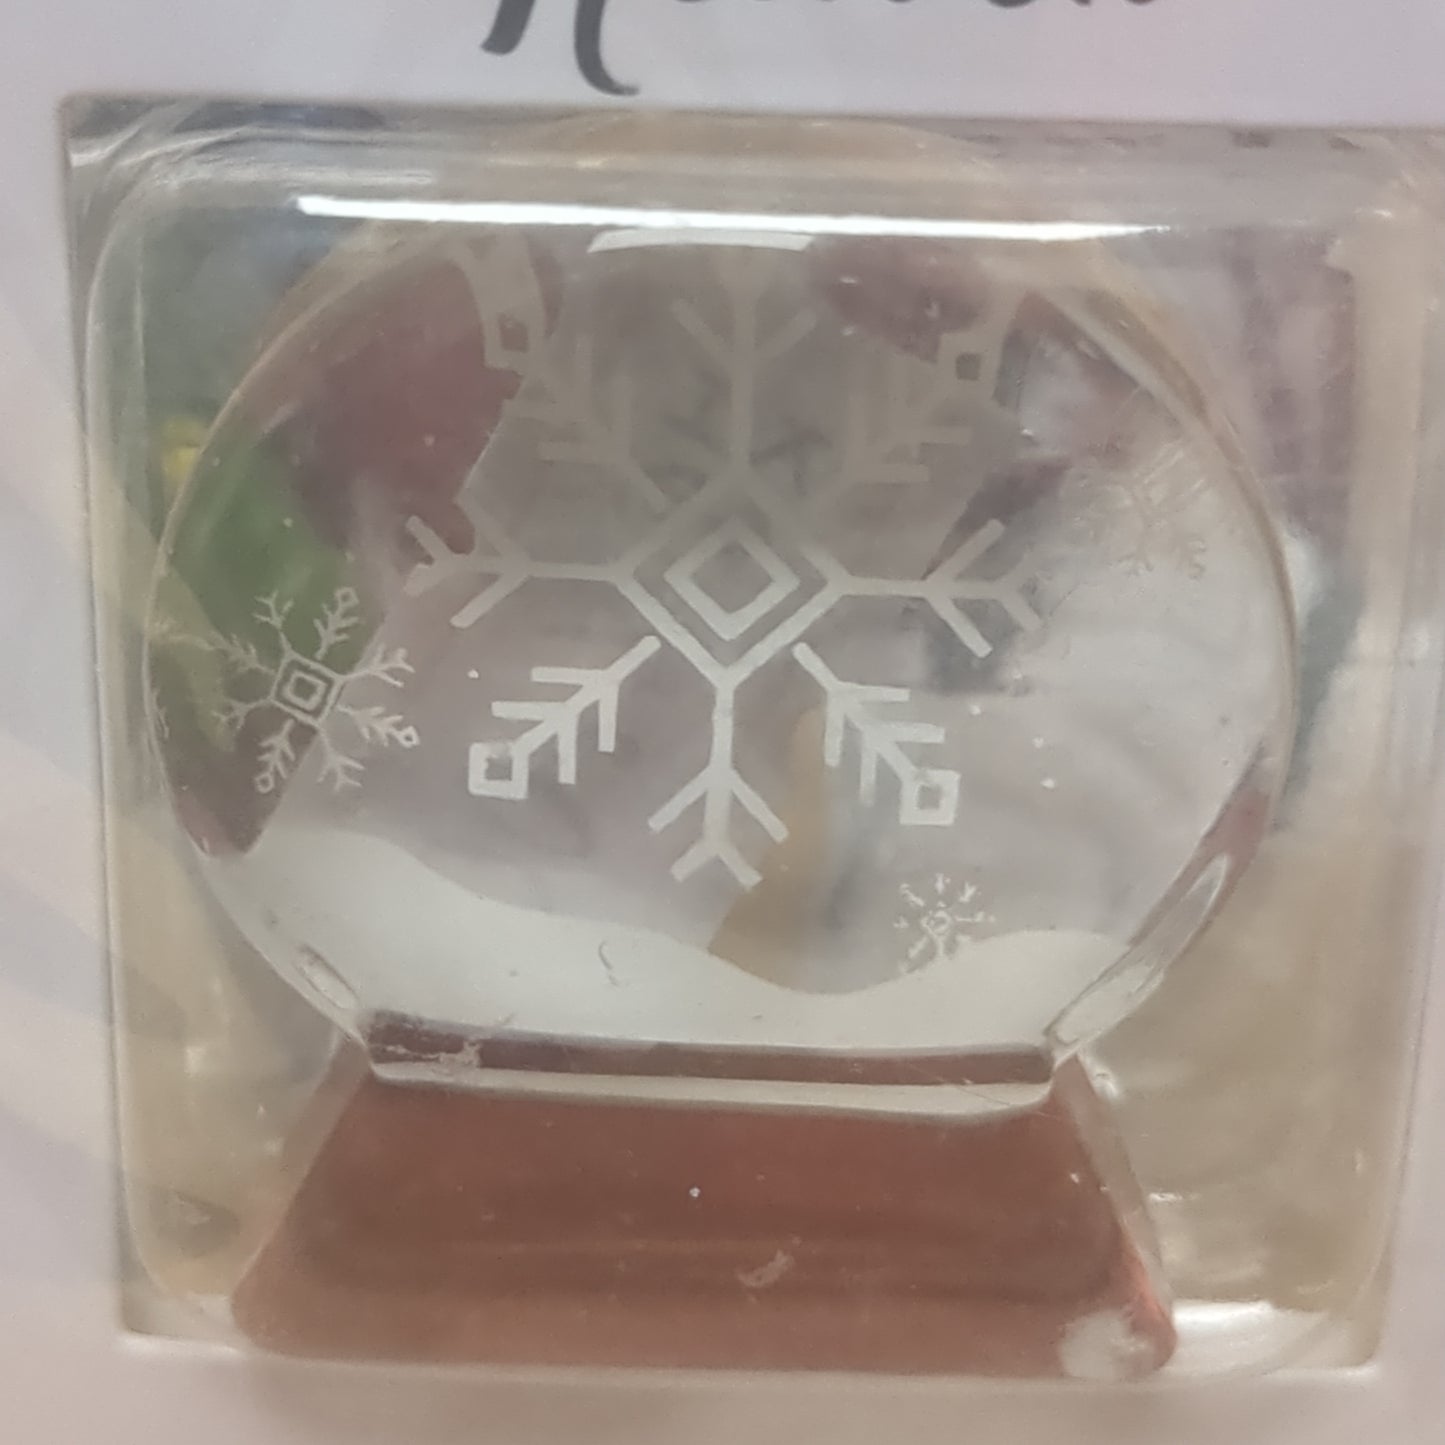 Pocket charm snow globe appearance with snowflake inside. Snowflakes are kisses from heaven